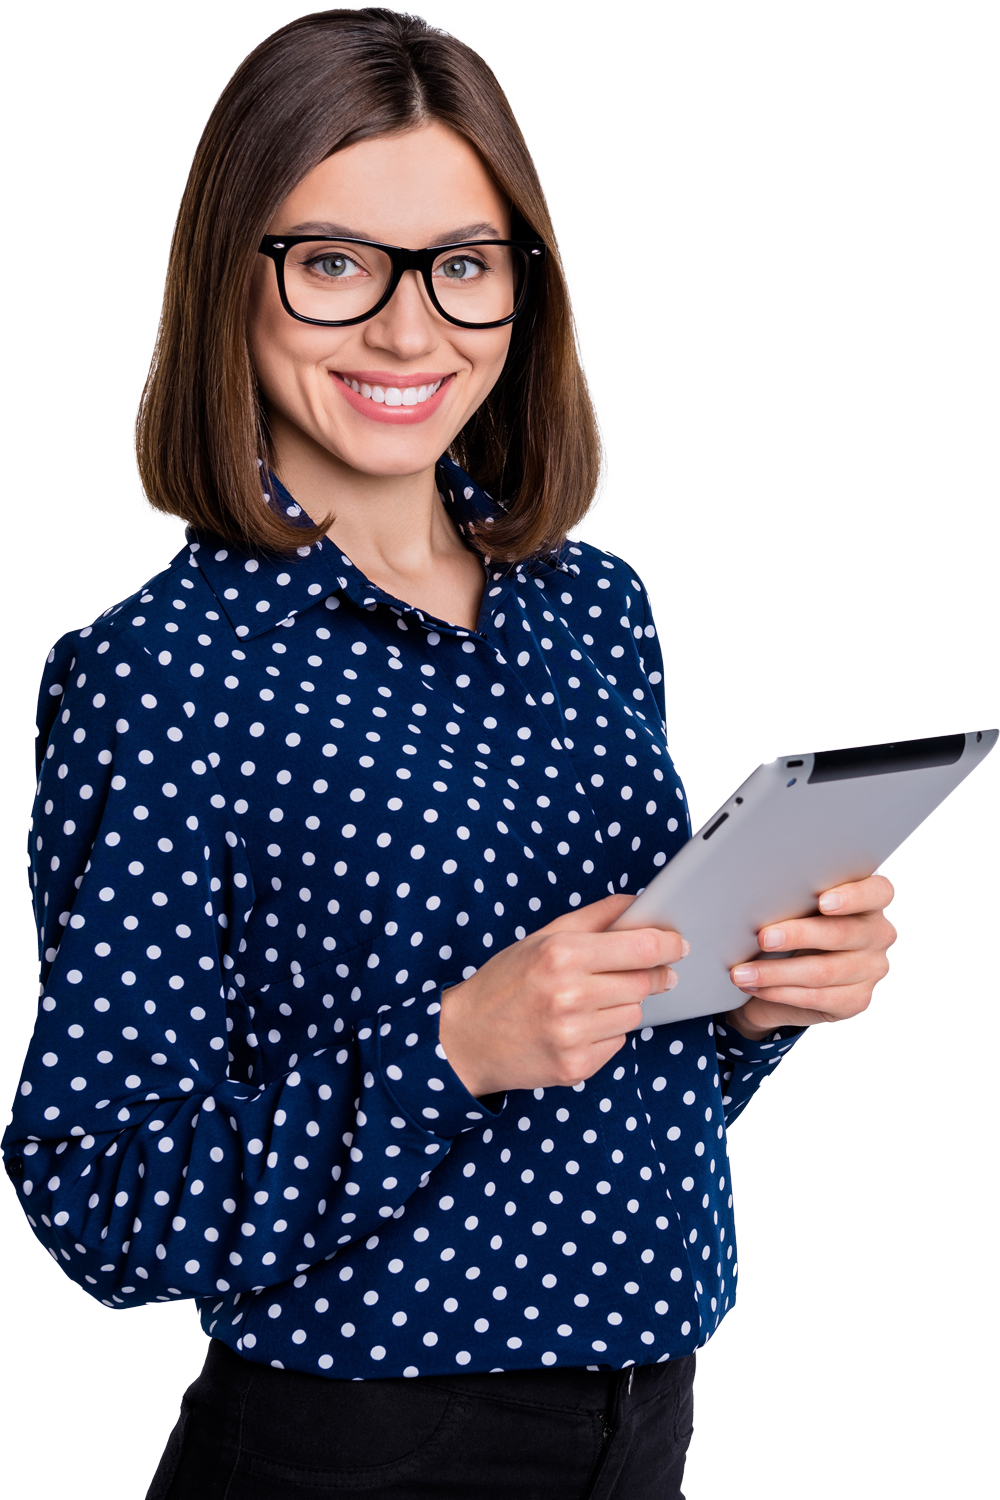 a woman wearing glasses and a blue polka dot shirt is holding a tablet computer